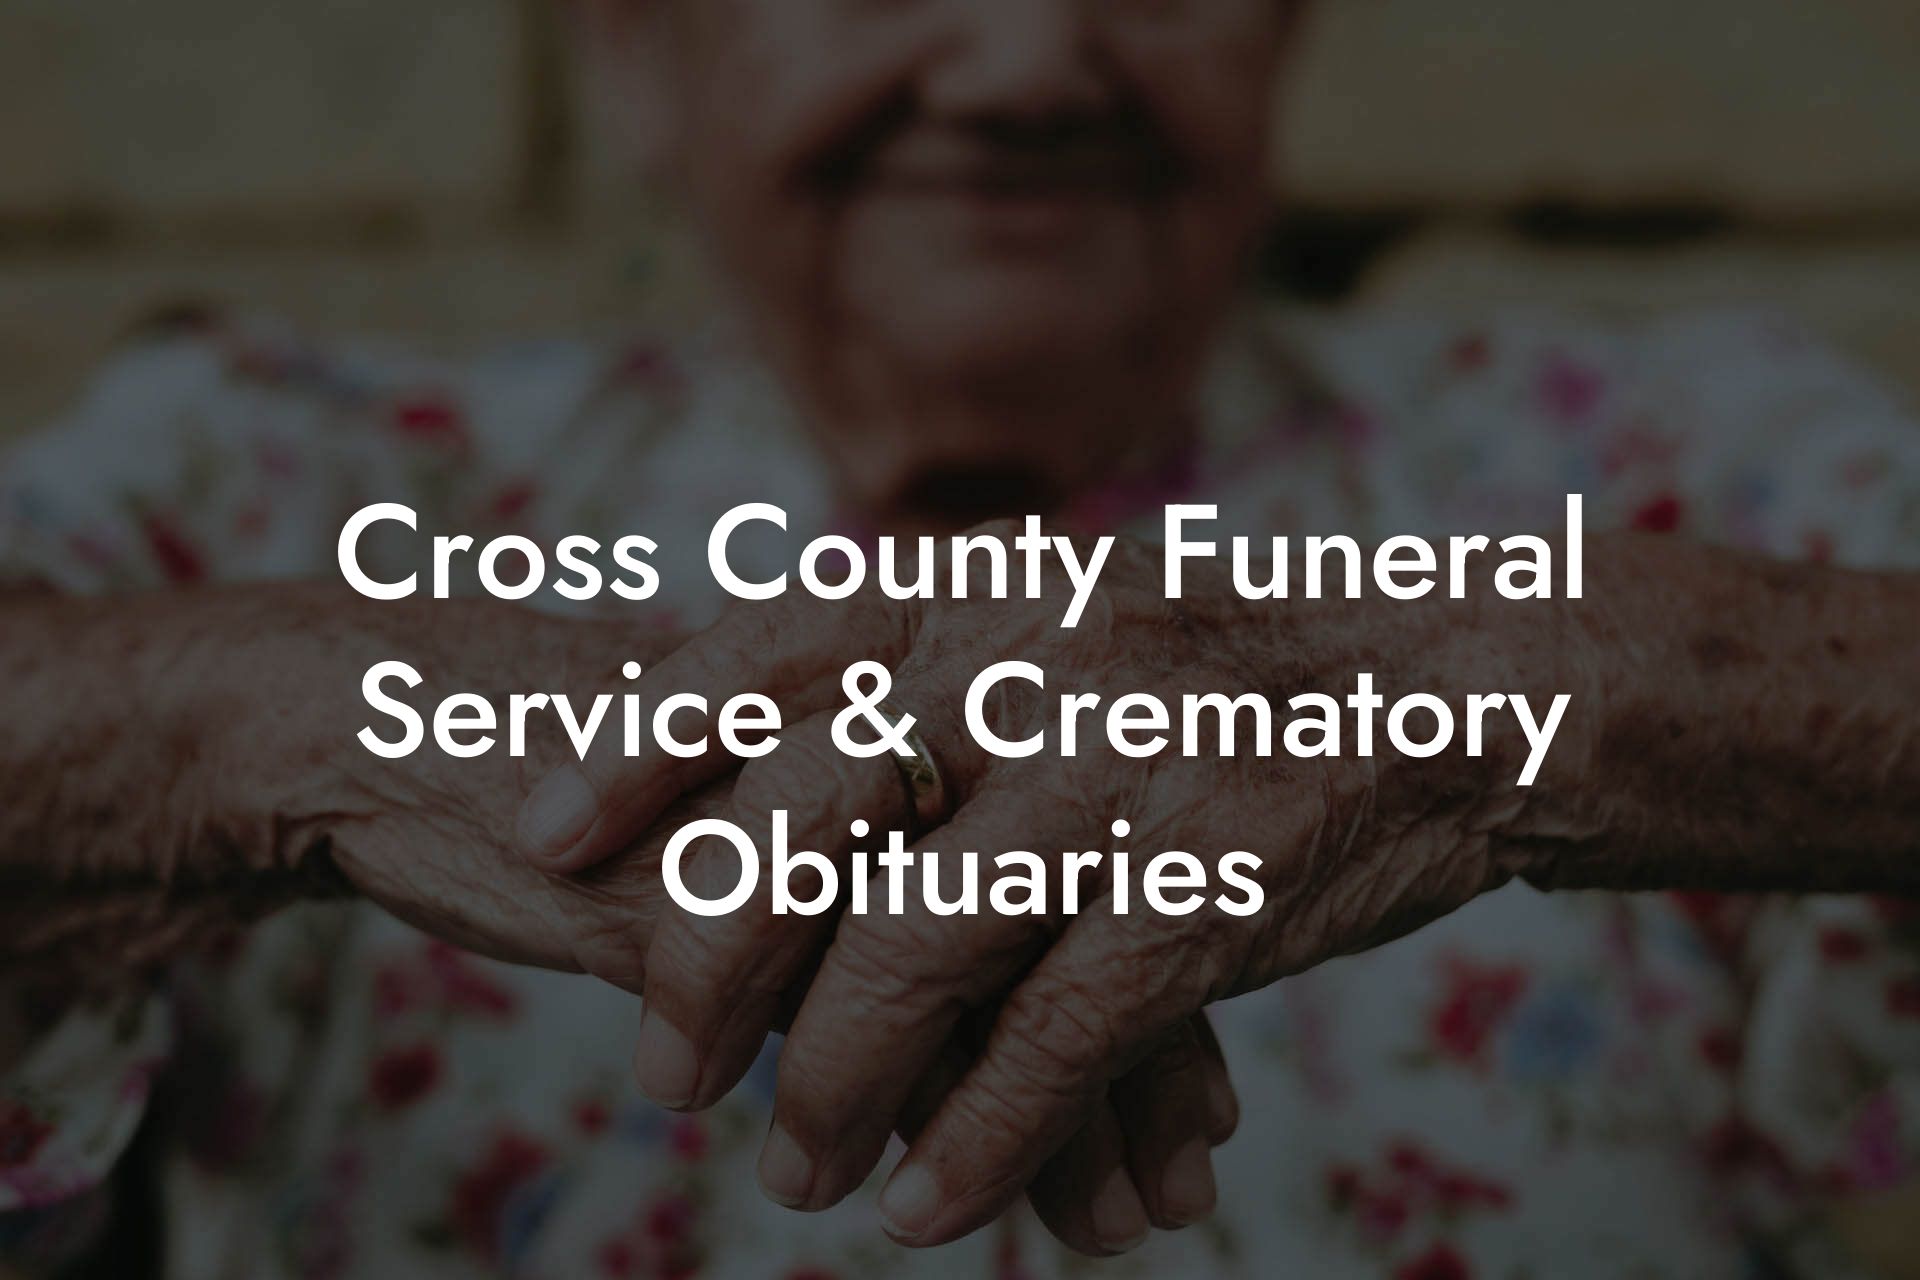 Cross County Funeral Service & Crematory Obituaries